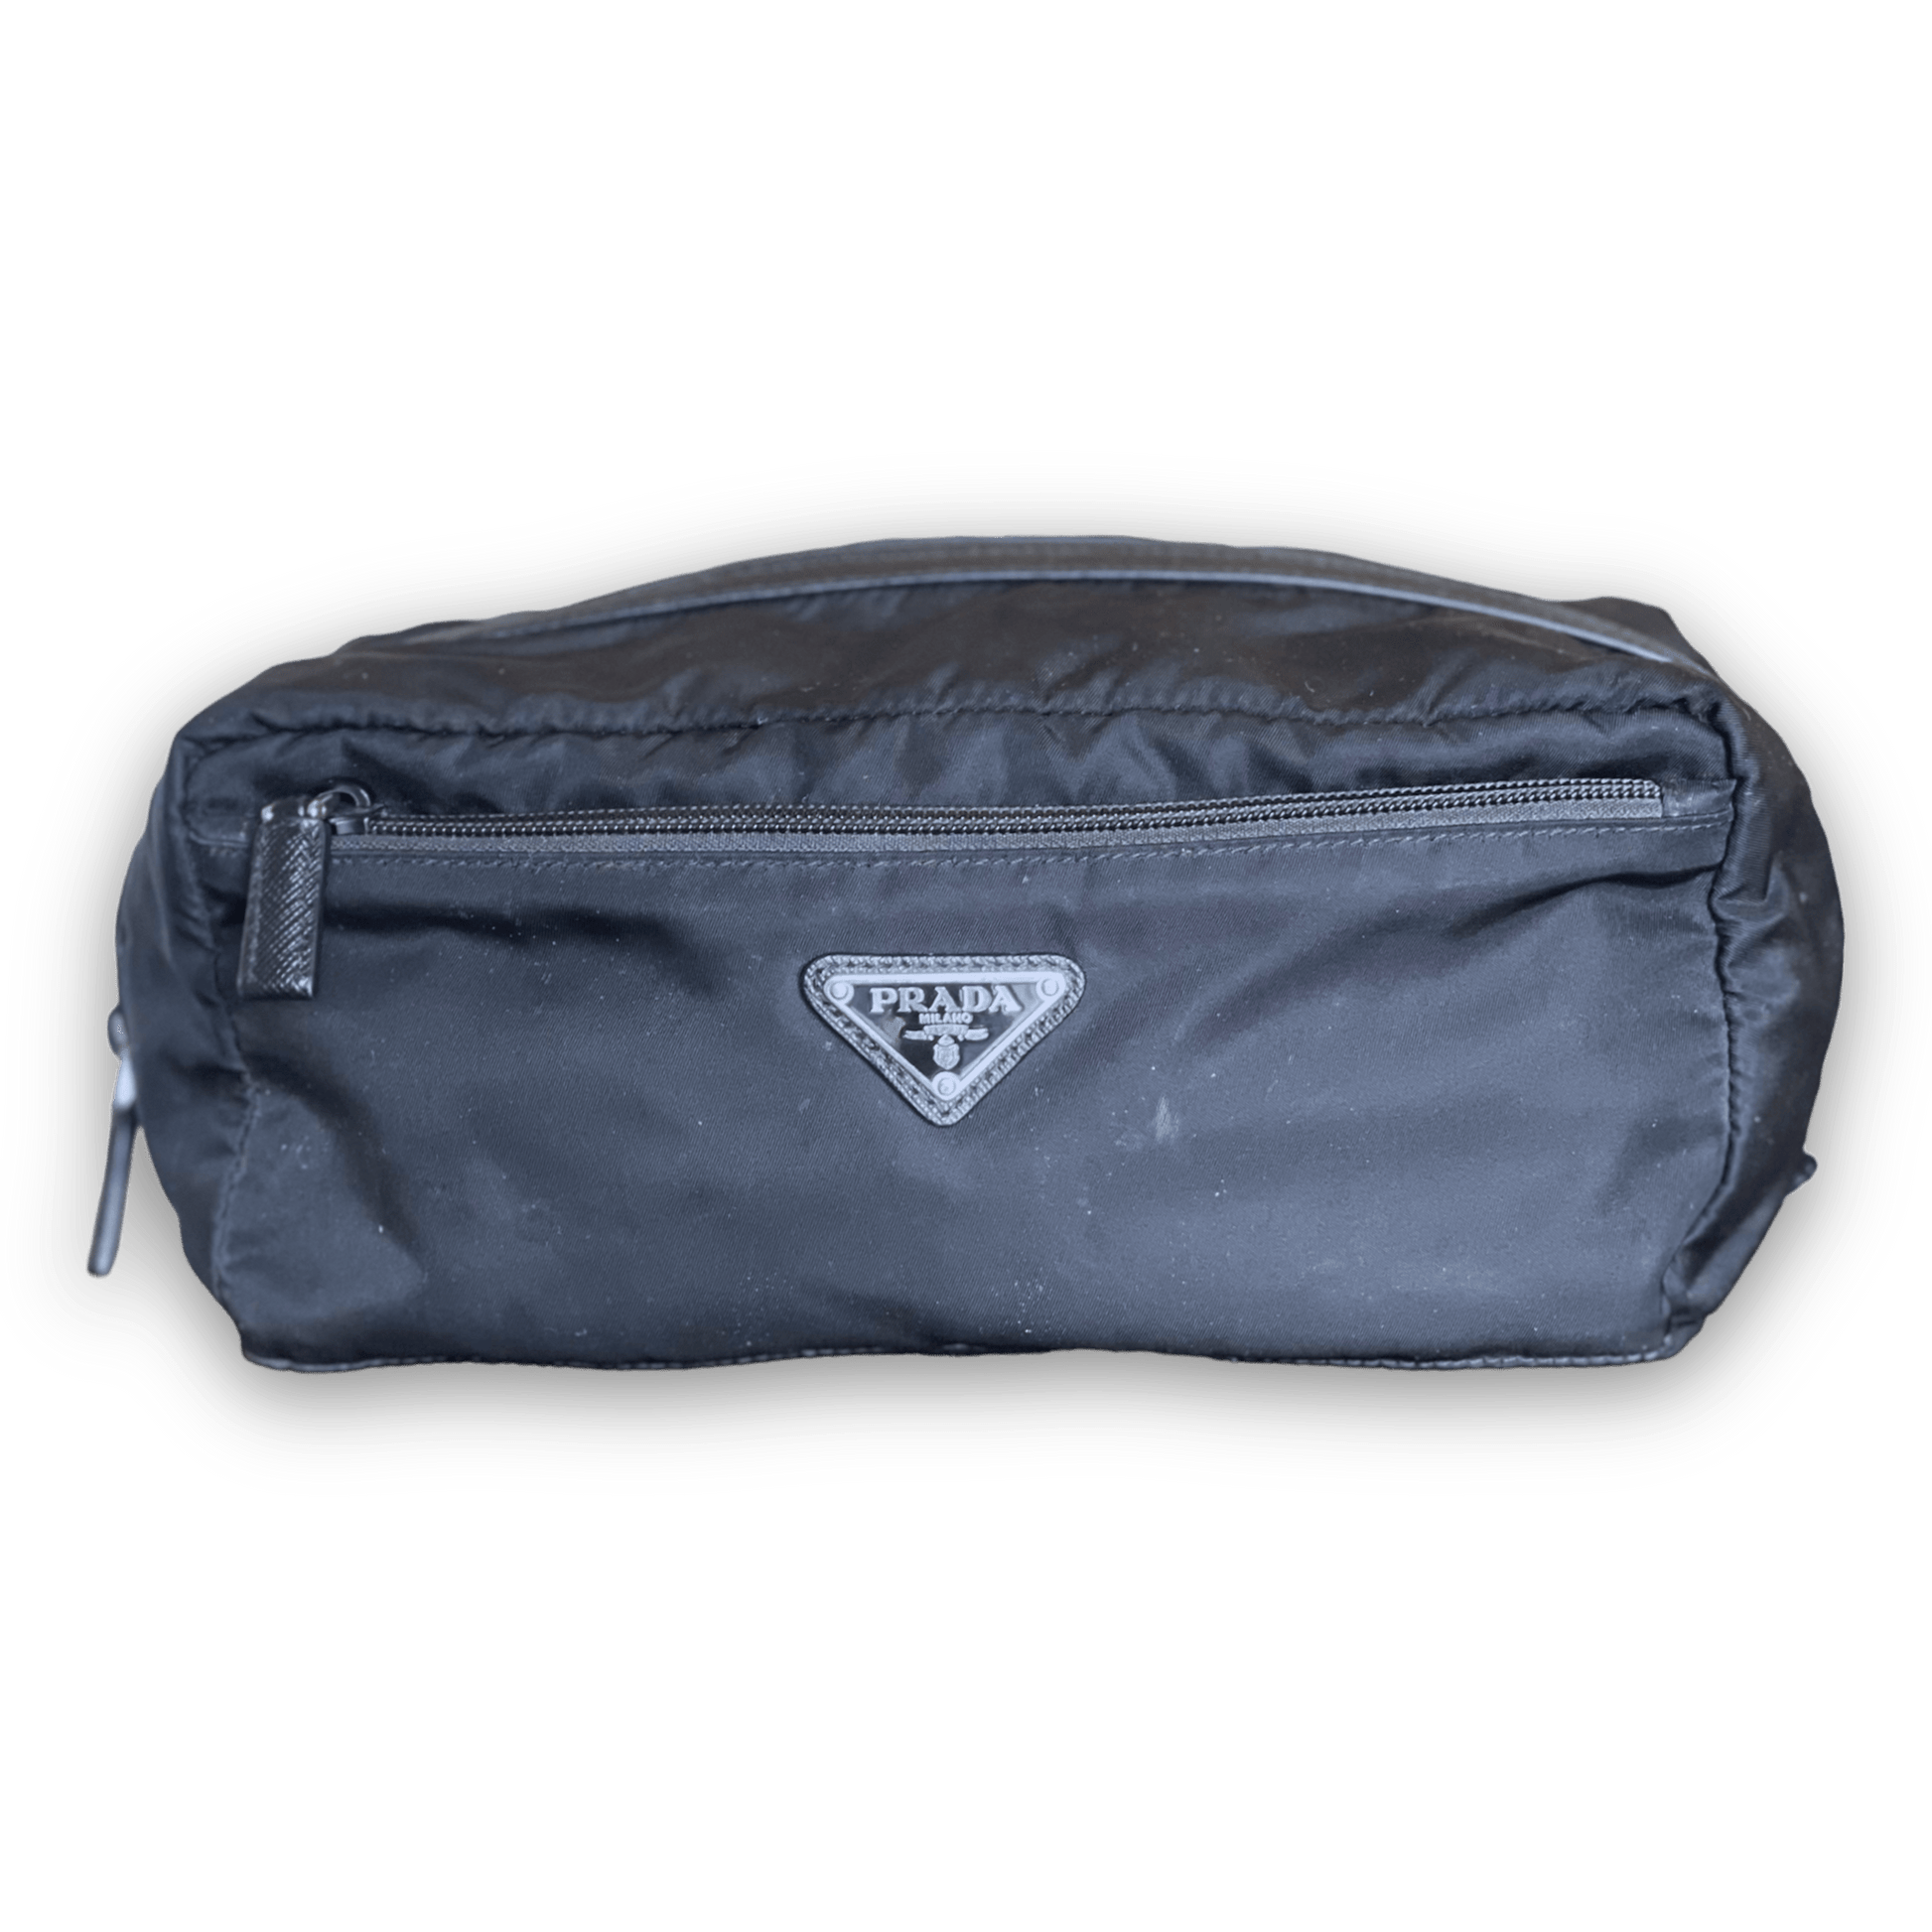 Toiletry Bag 25 - Luxury All Luggage and Accessories - Travel, Women  M47527